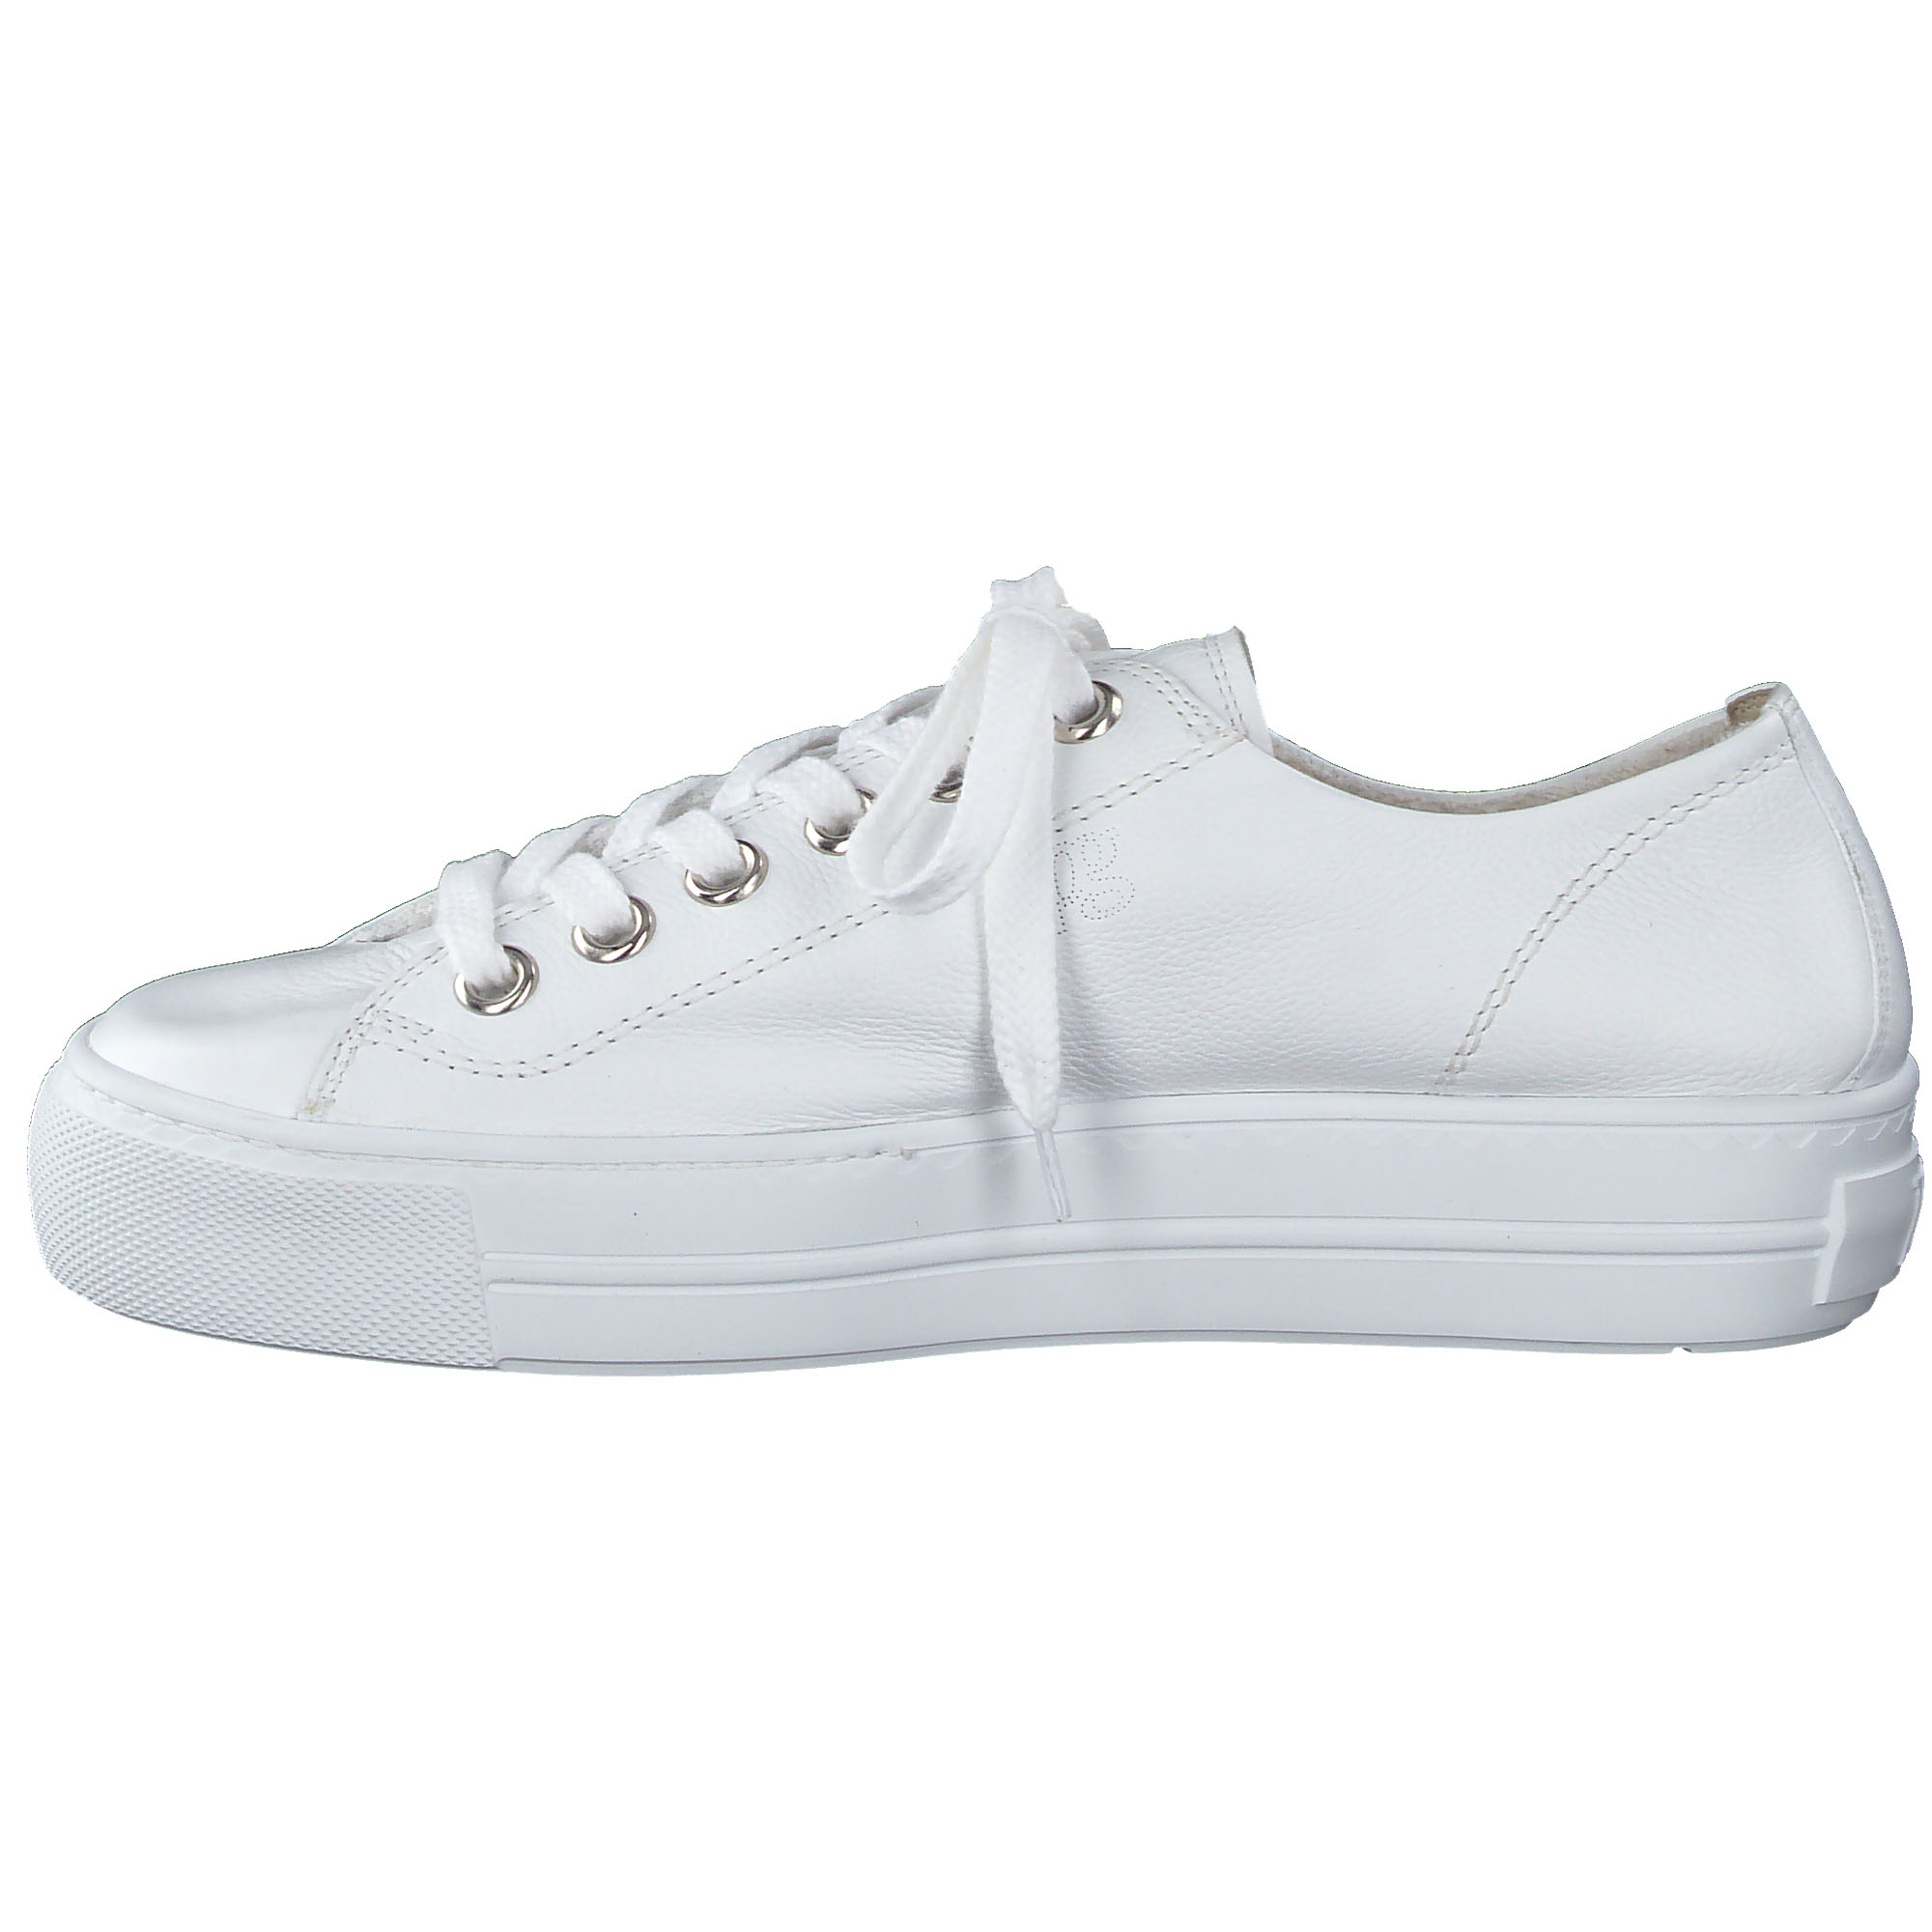 Paul Green Super Soft - White smooth leather